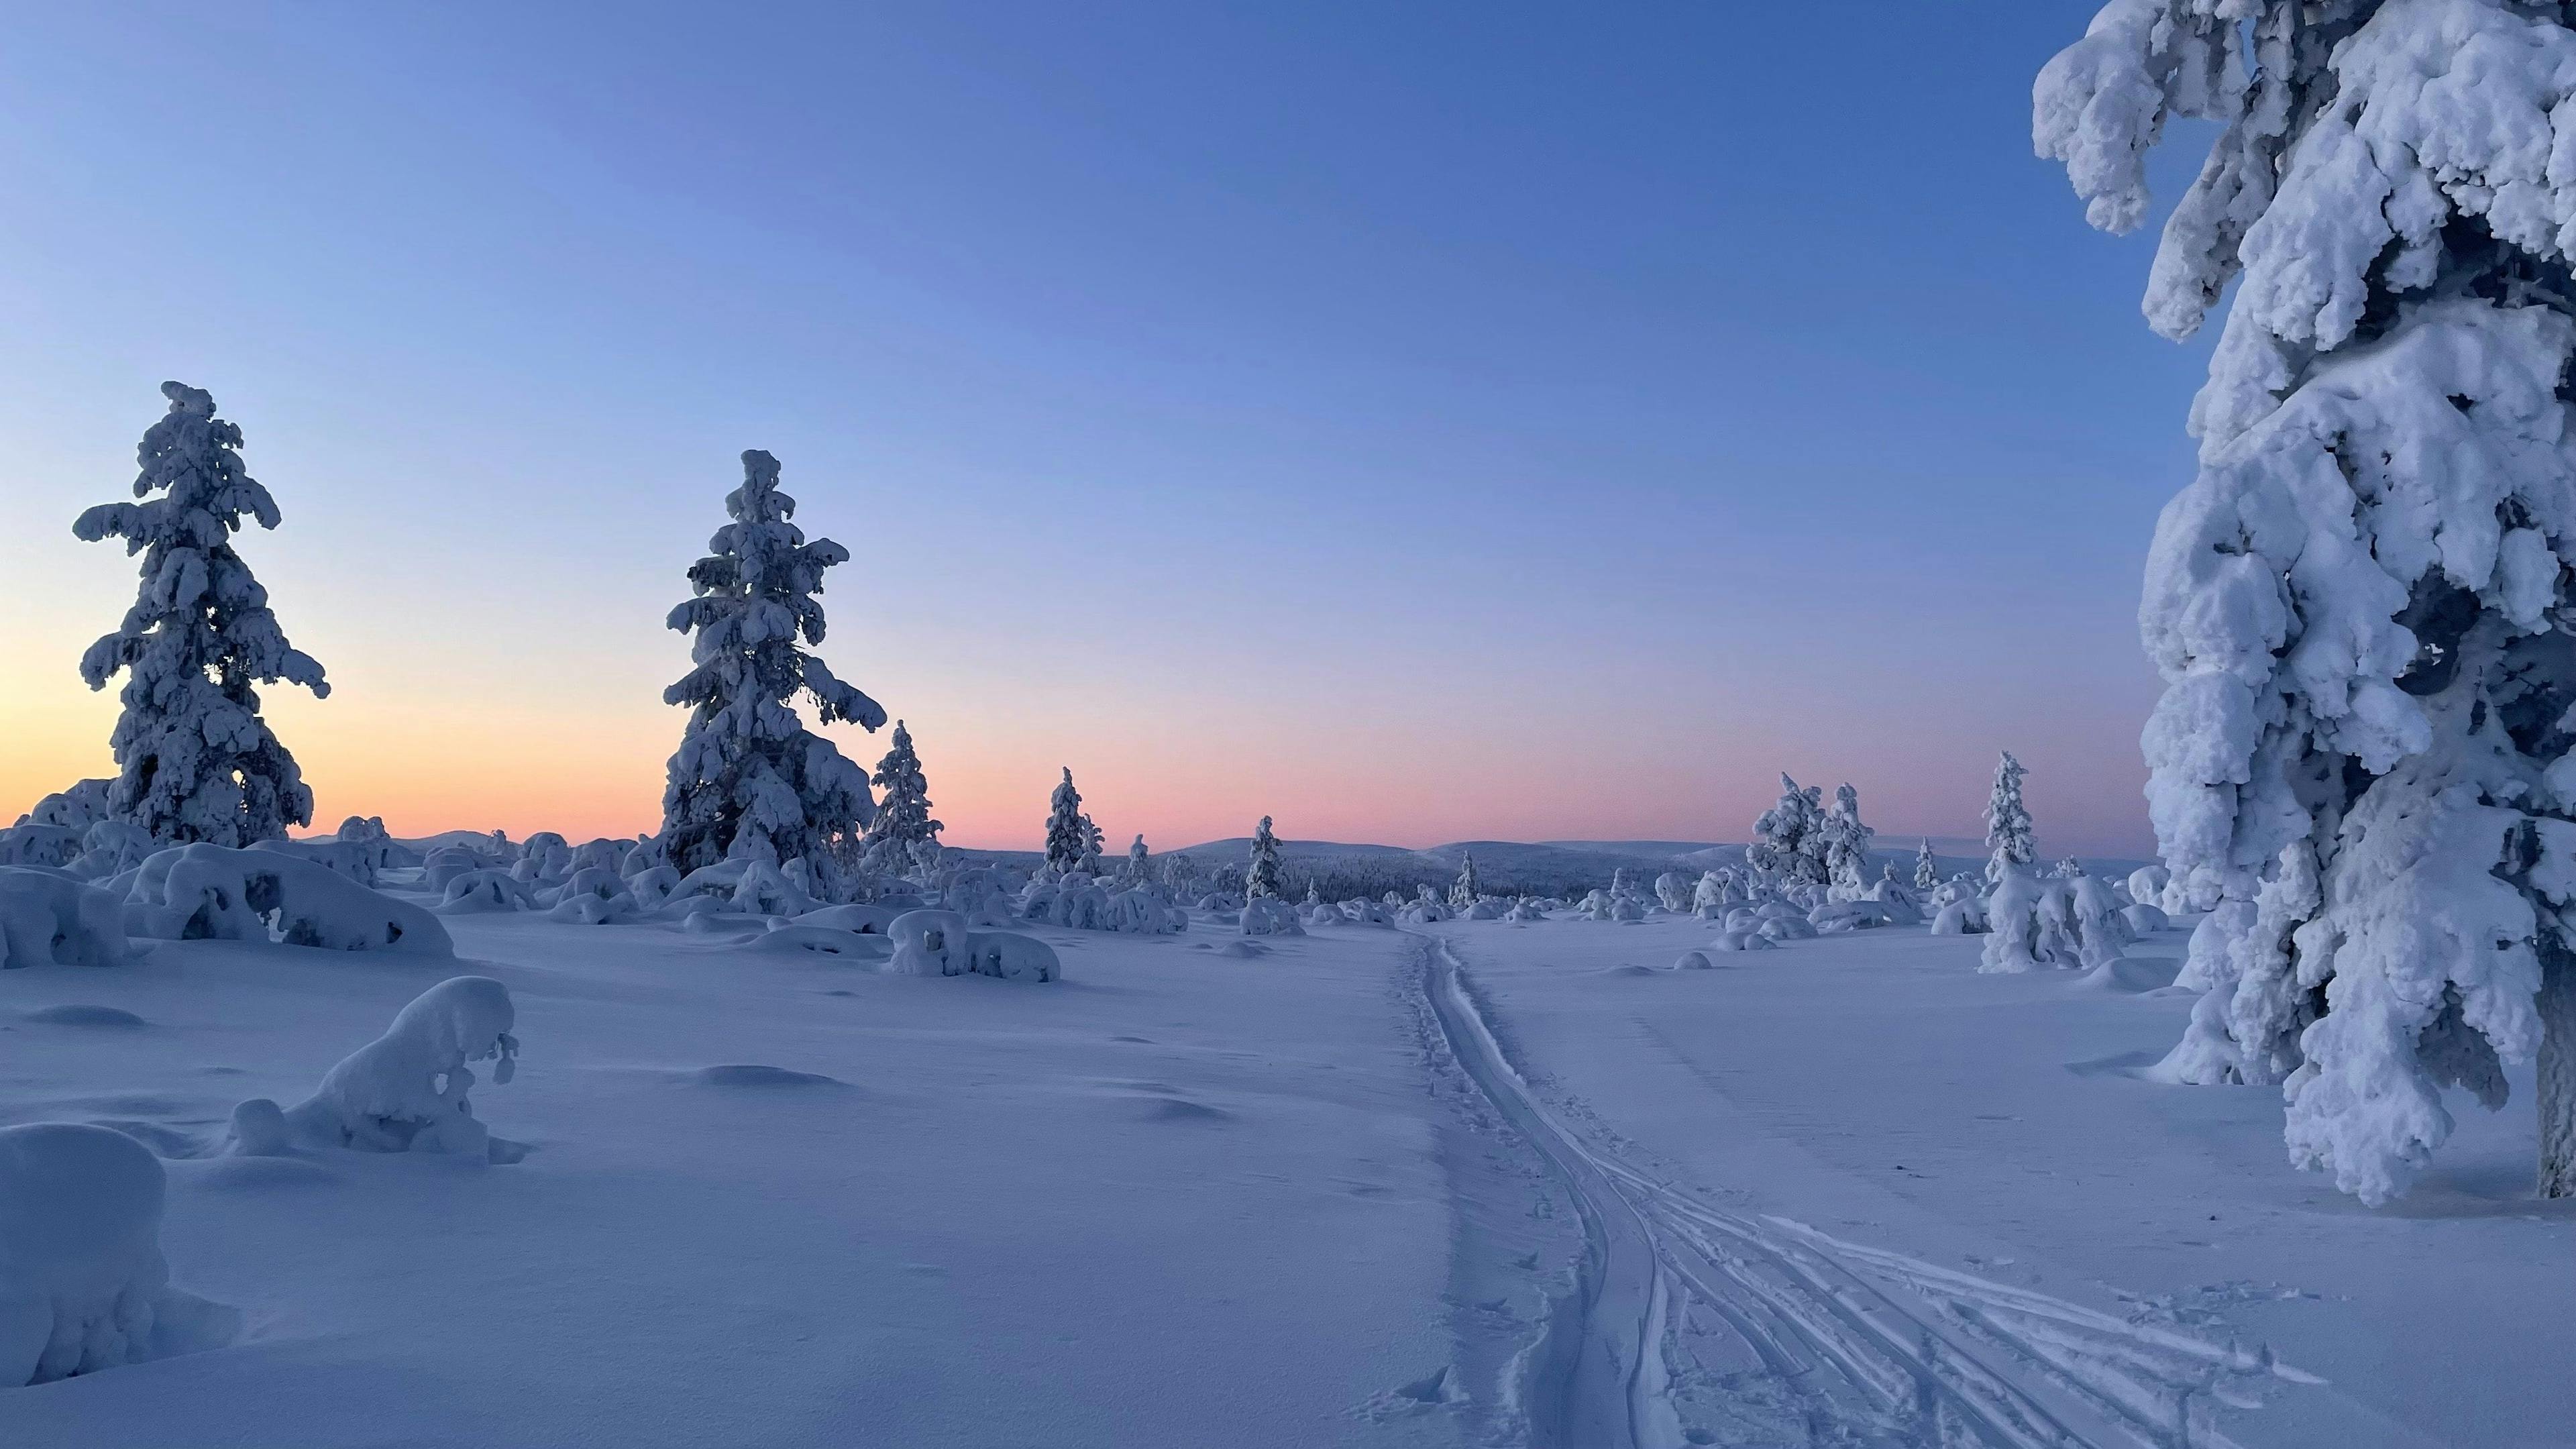 Skiing in snowy Lapland in Finland.